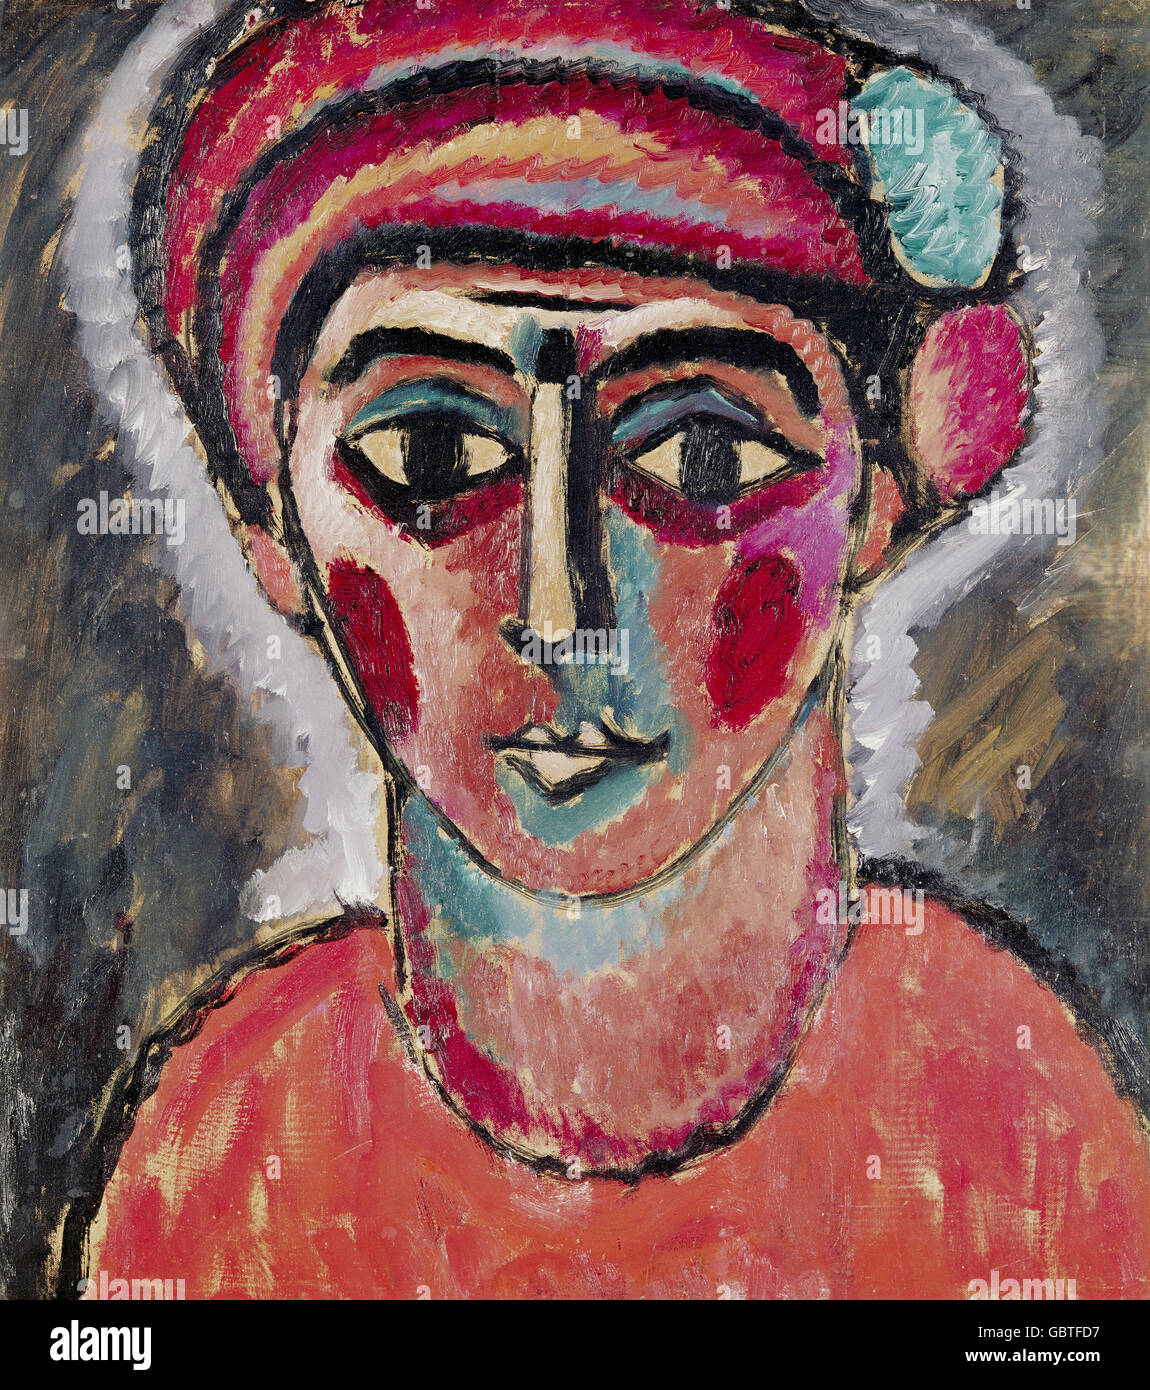 fine arts, Jawlensky, Alexej von, (1864 - 1941), painting, 'head of young man, called Heracles', 1912, Ostwall museum, Dortmund, Stock Photo